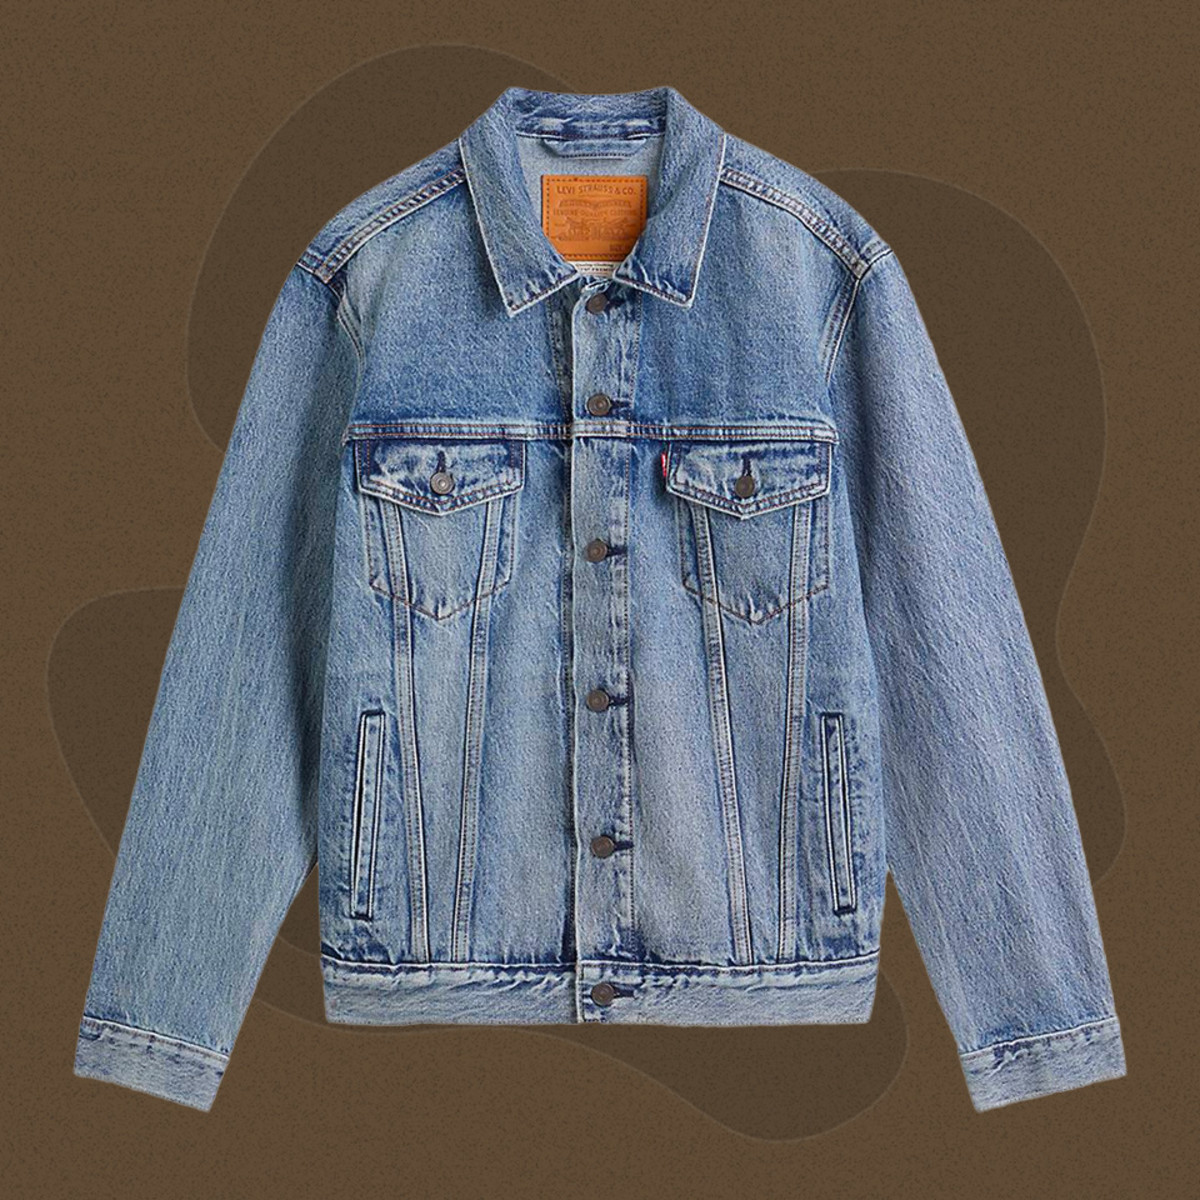 Designer Denim Best Leather Jackets With Jacquard Weave And Full Print  Lapel For Men And Women By Demin From Superca, $119.09 | DHgate.Com